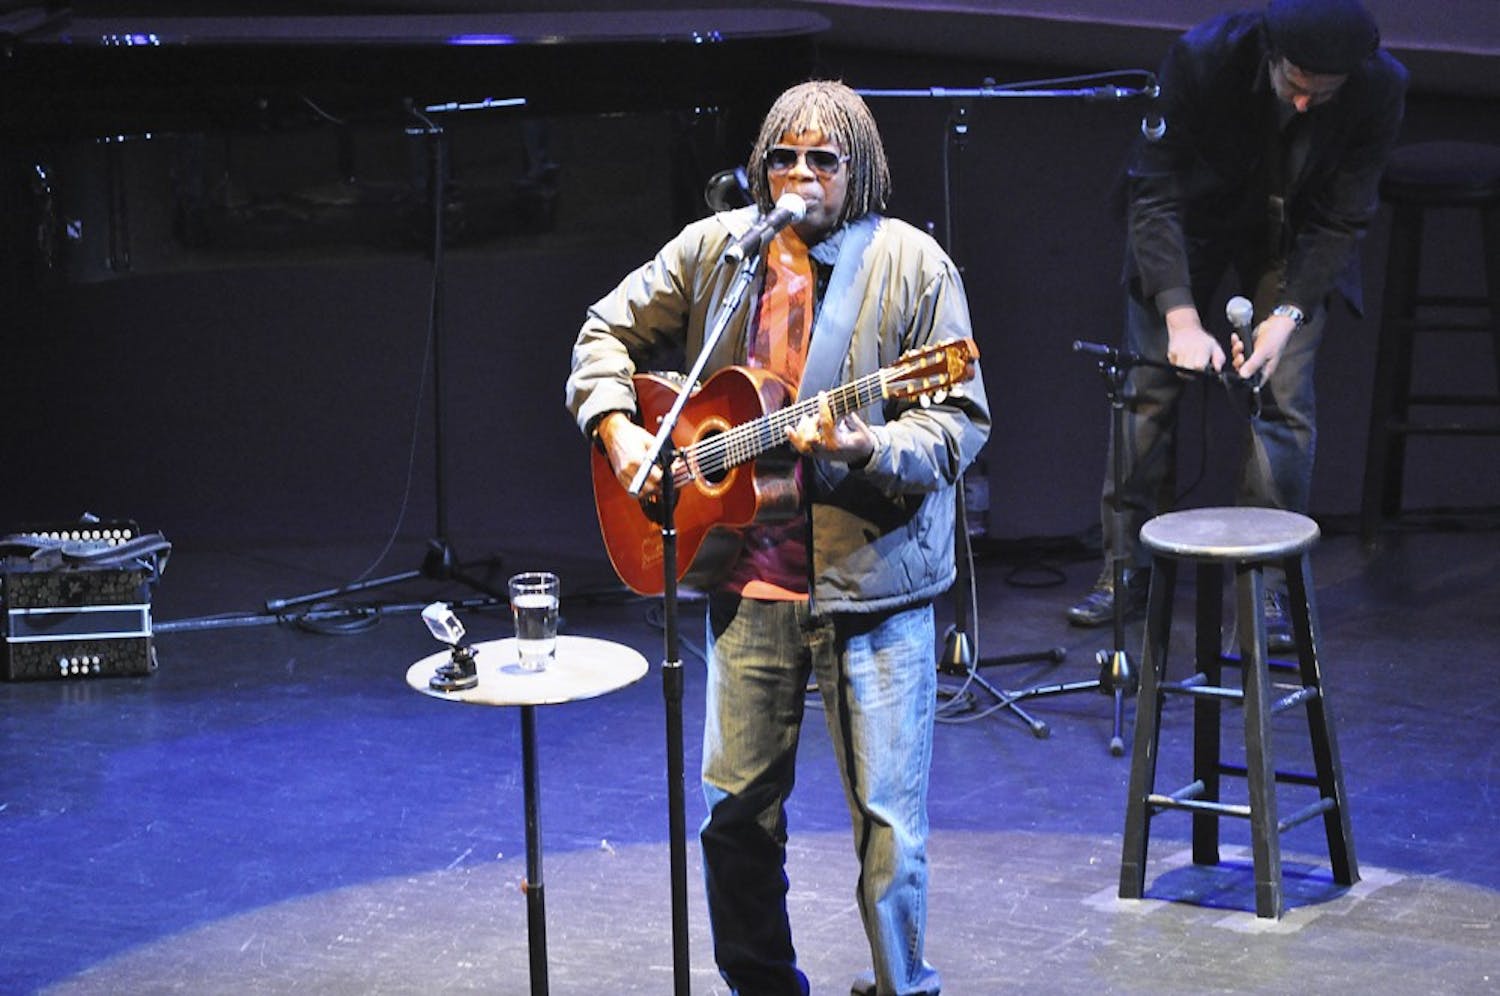 Milton Nascimento, the influential Brazilian singer-songwriter known for fusing Africanized jazz with Latin-American folk, performed at Memorial Hall on Saturday night.